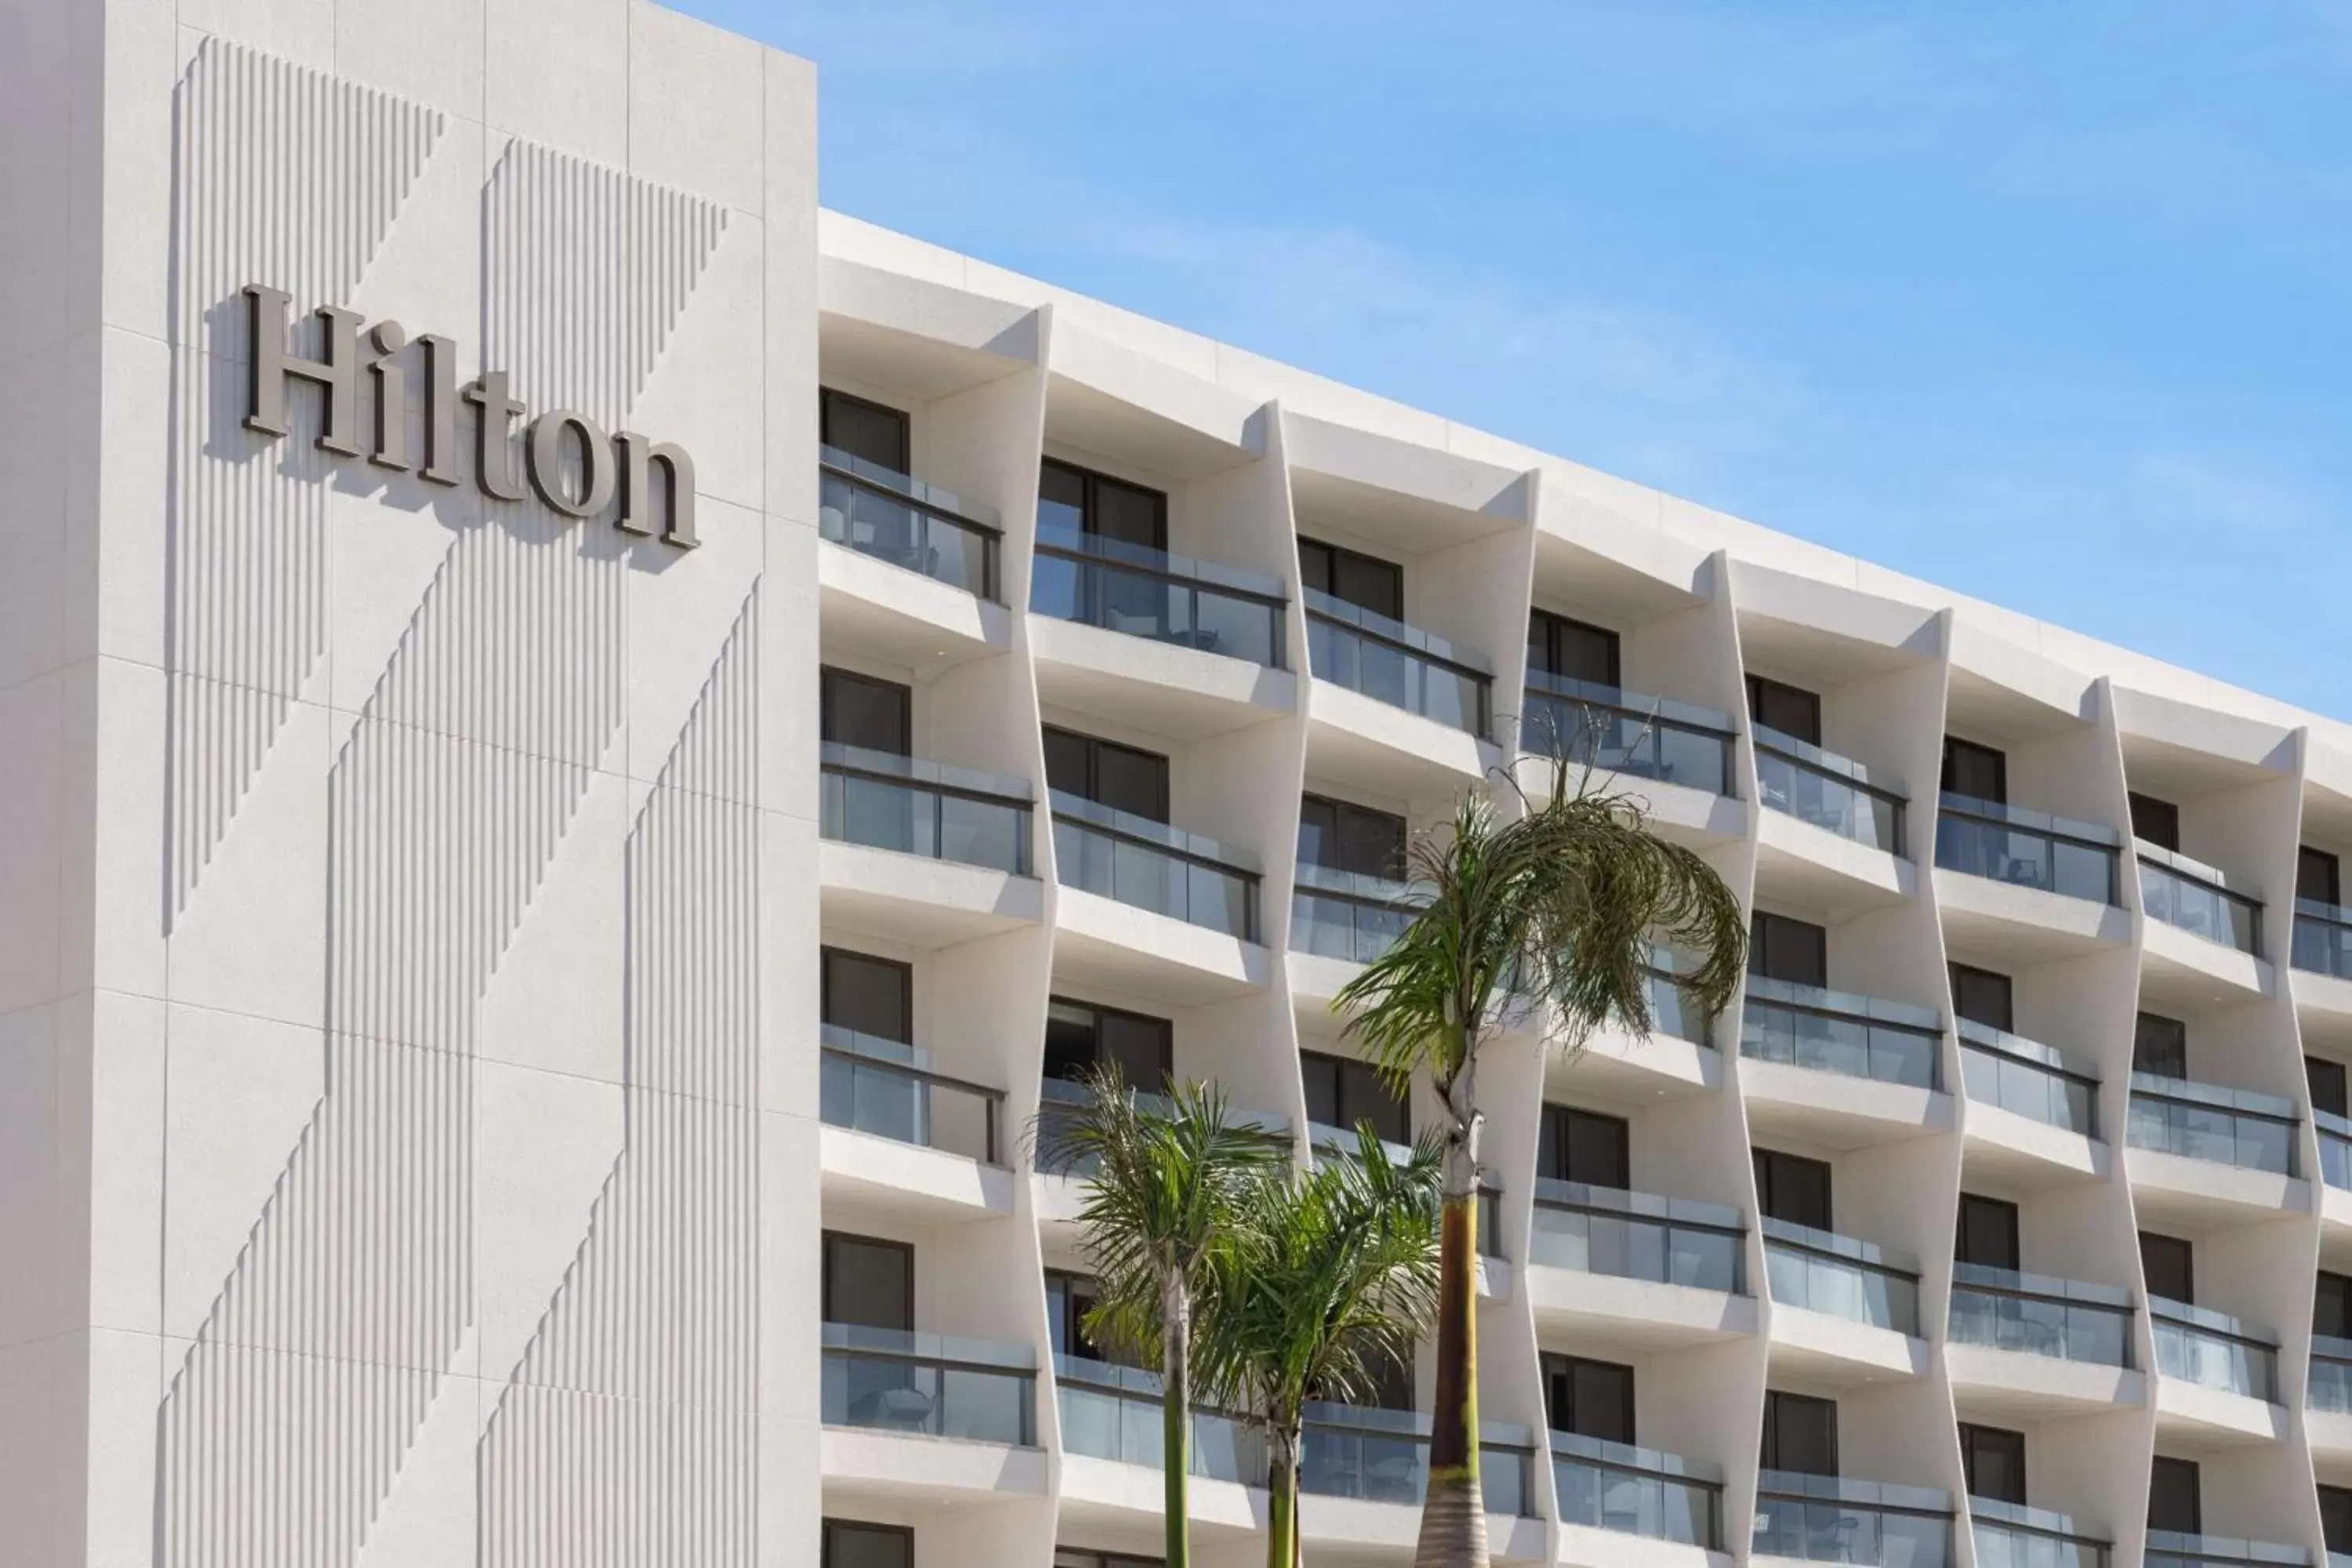 Property Building in Hilton Cancun, an All-Inclusive Resort